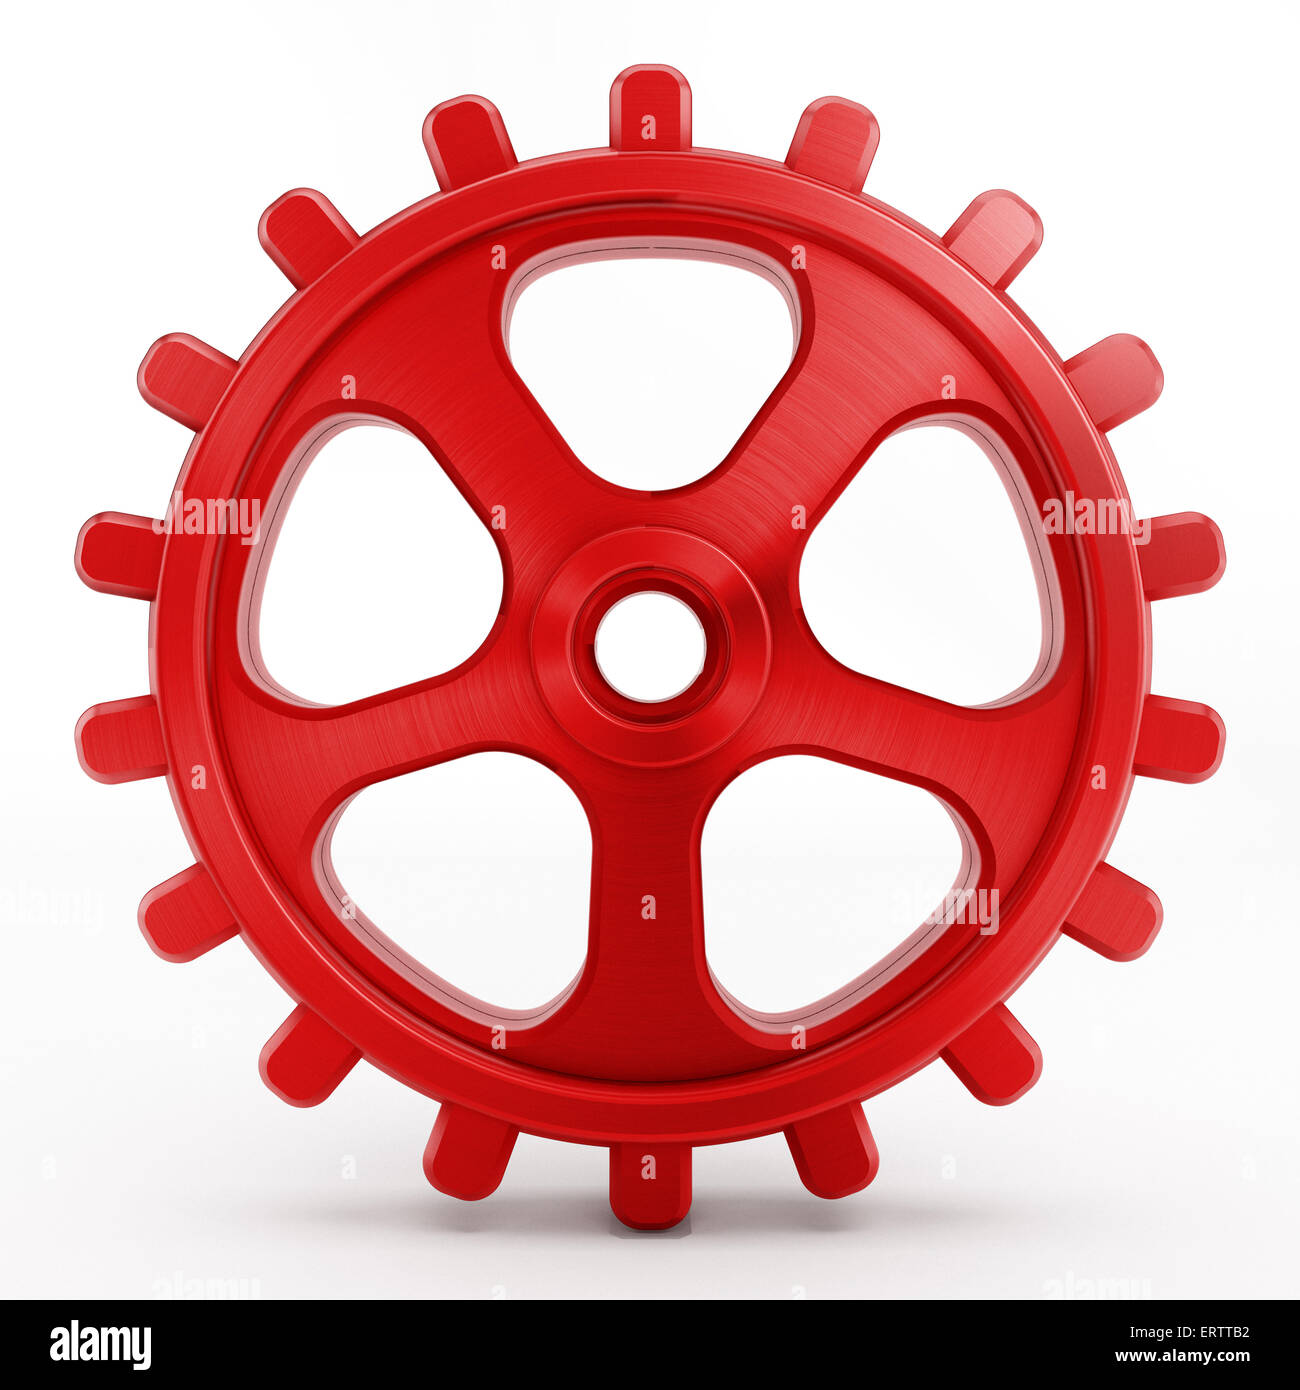 Red gear or cogwheel isolated on white background Stock Photo